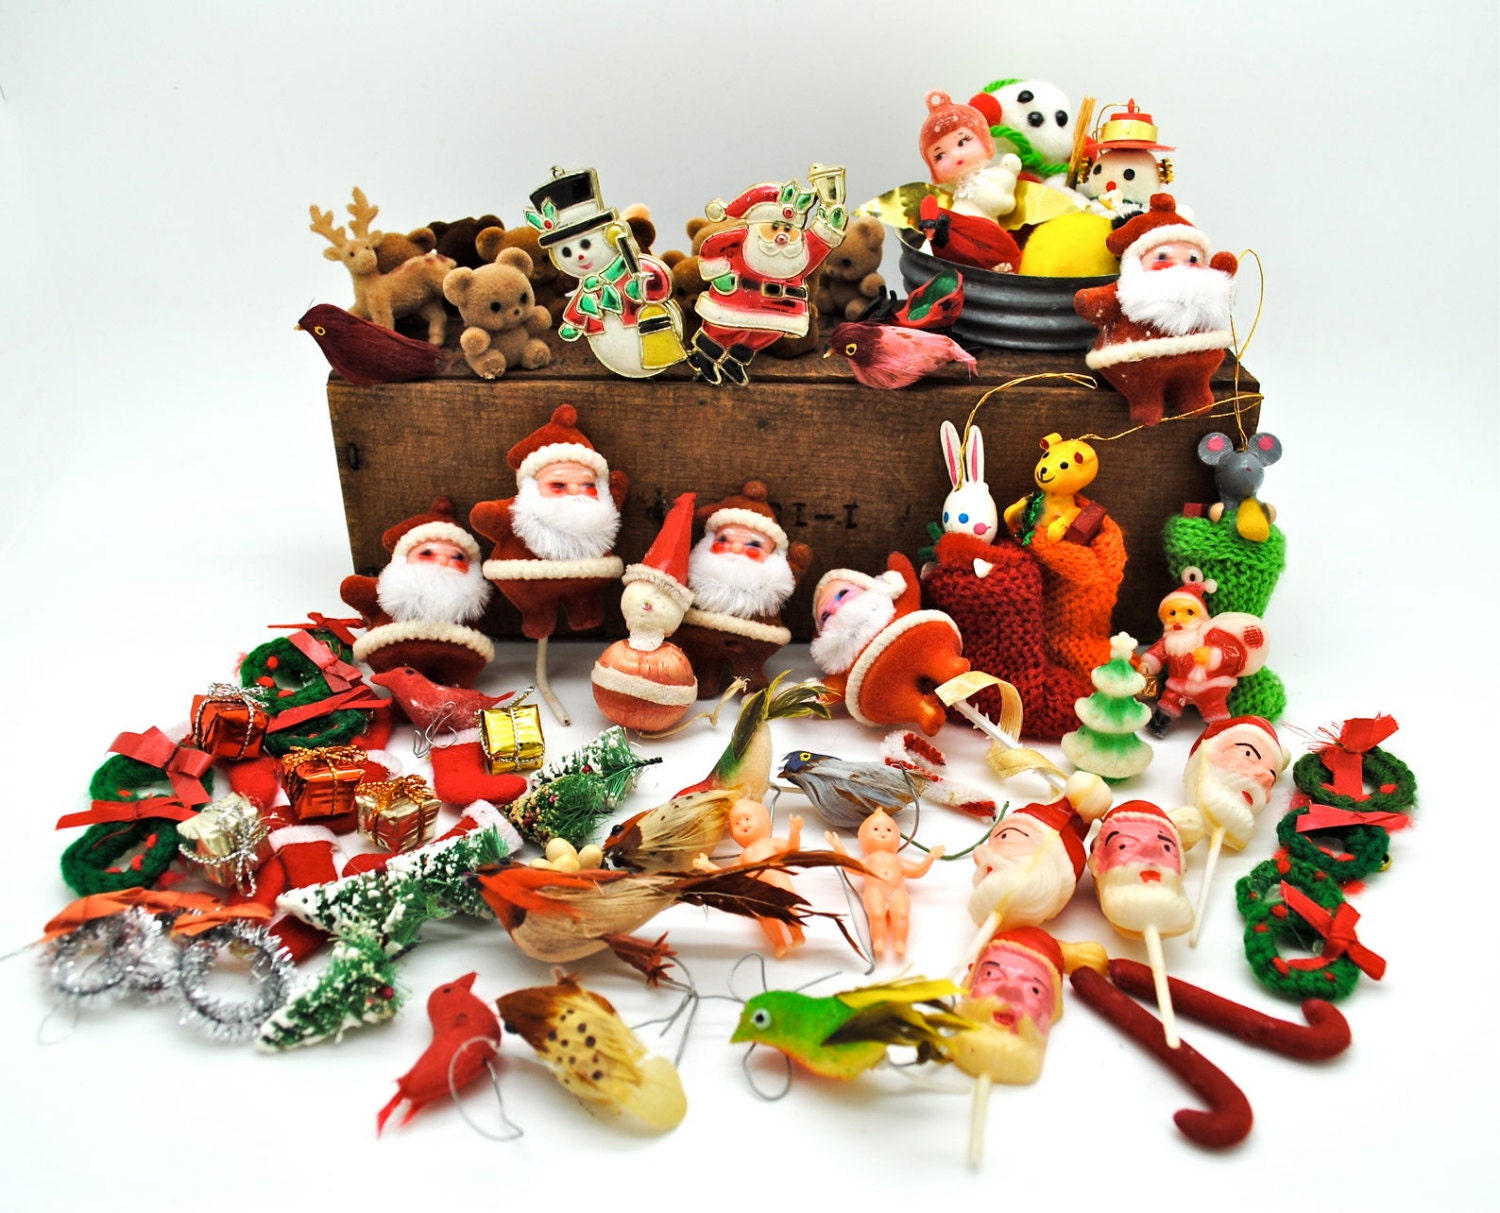  Christmas Decorations For Sale for Small Space